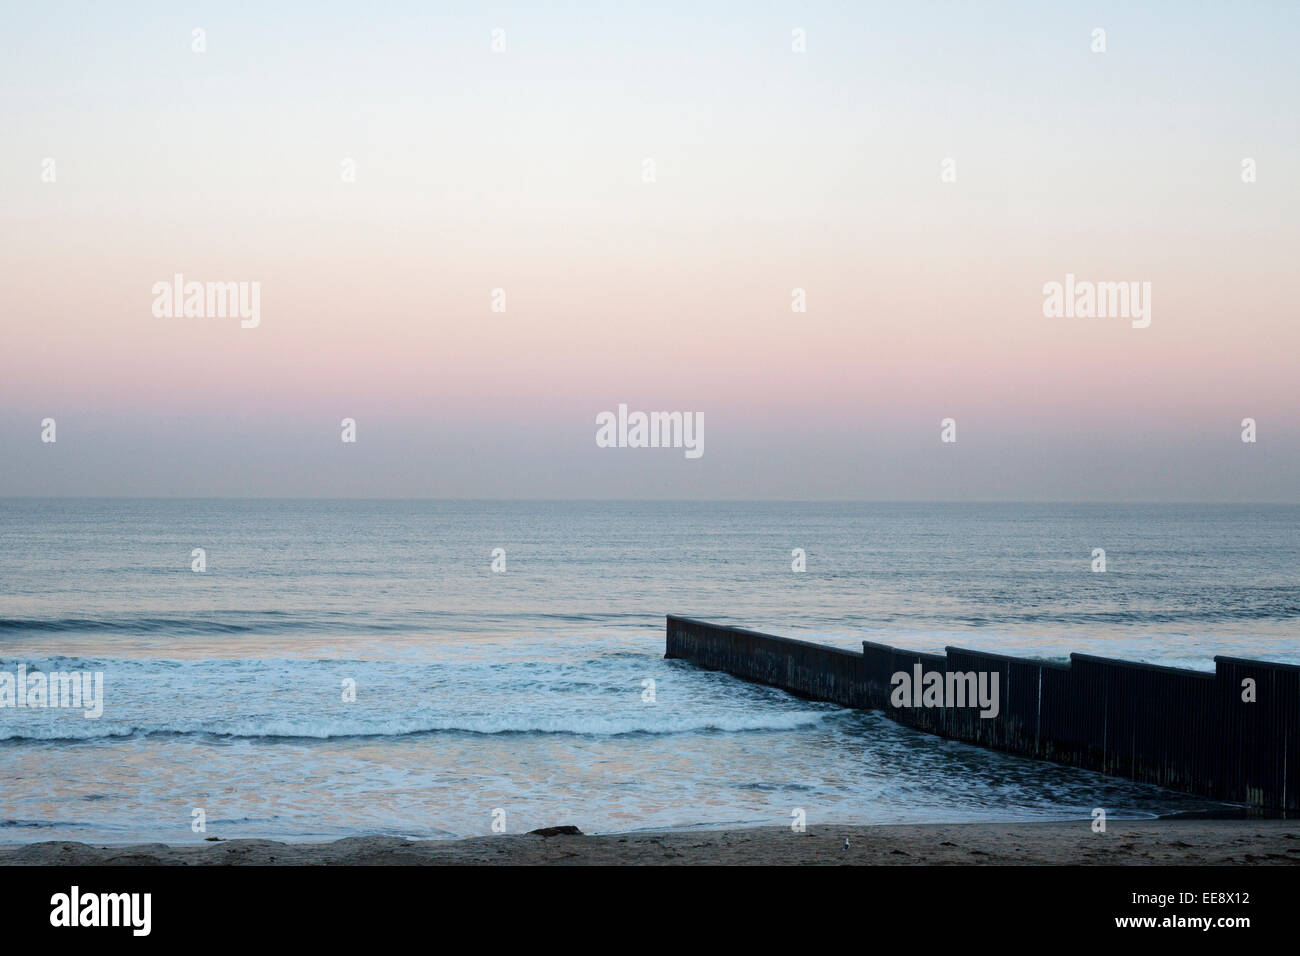 Sunrise at Tijuana beach in Mexico, showing the the US - Mexican border fence running into the Pacific Ocean. Stock Photo